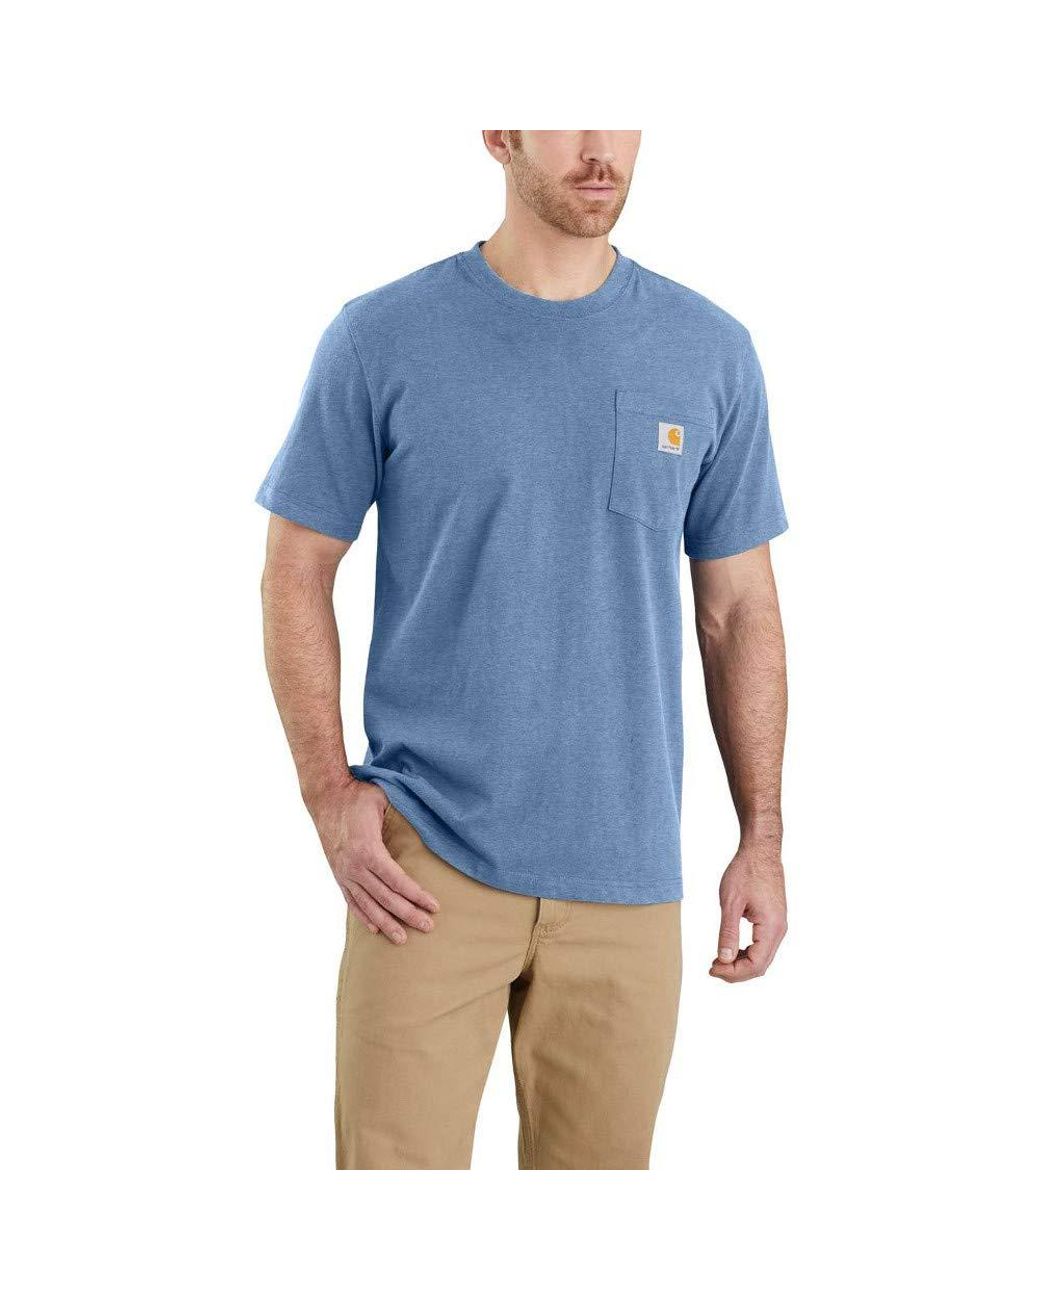 Carhartt Cotton Relaxed Fit Heavyweight T-shirt in Blue for Men - Lyst